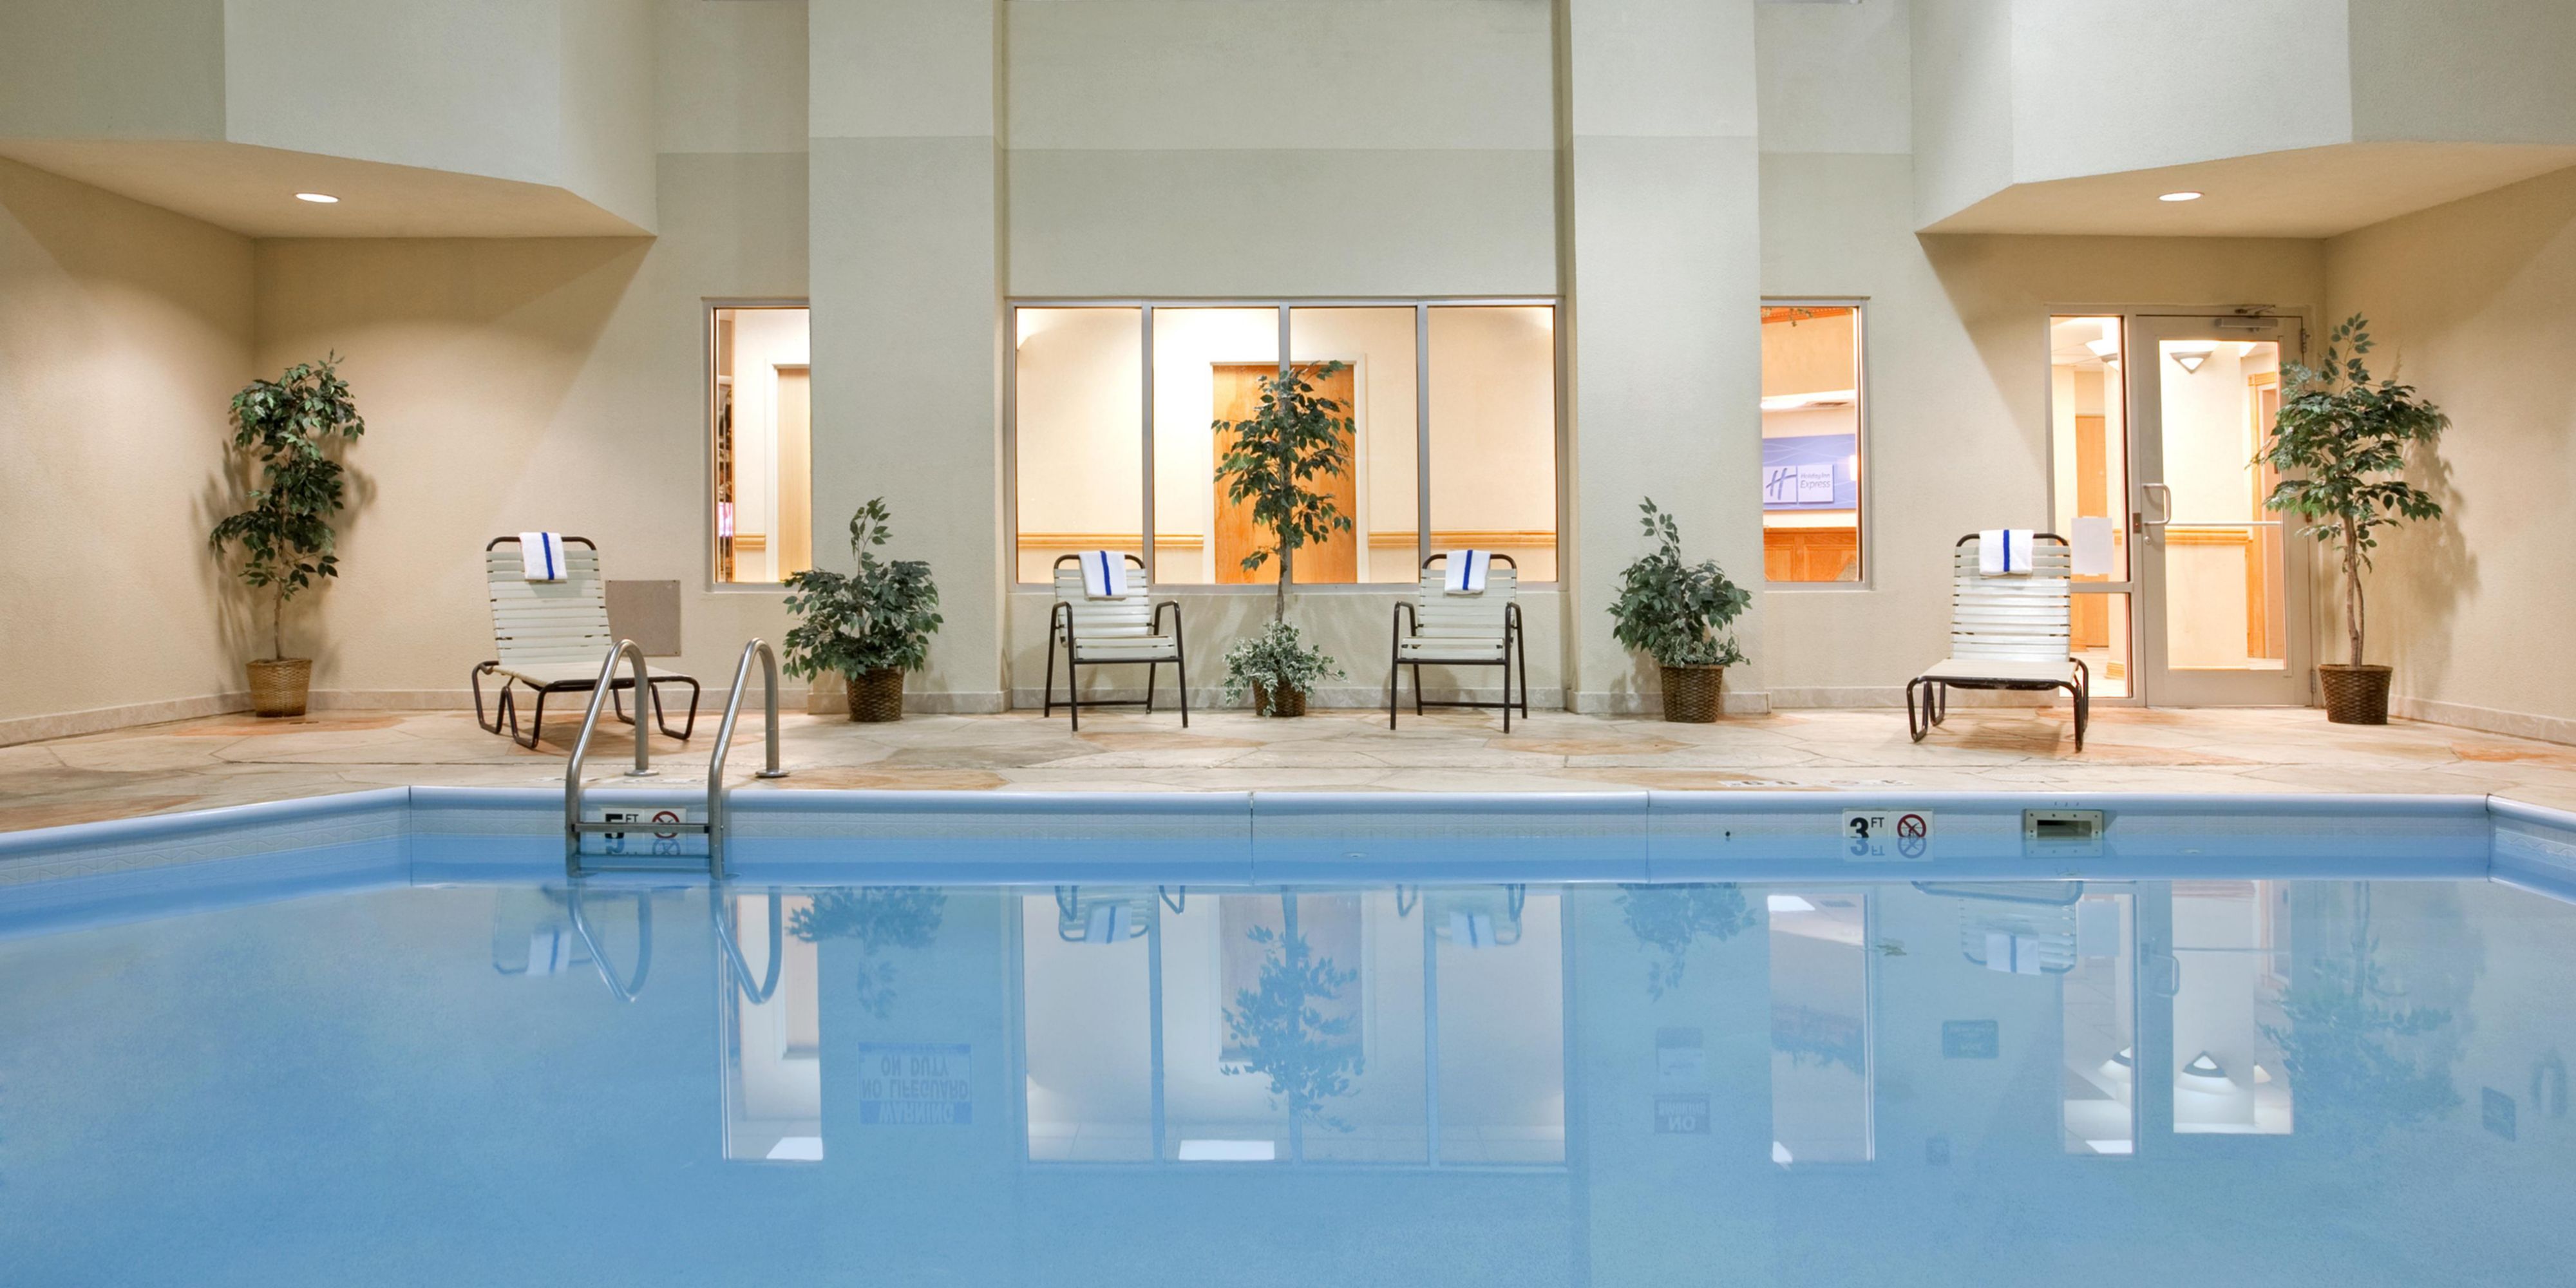 Jump in to relax in our indoor heated pool of 78 degrees! Where you will find towels provided, seating to sit with friends and family and a depth of 5 feet. Enjoy all of this from the hours of 9a to 10p daily. 